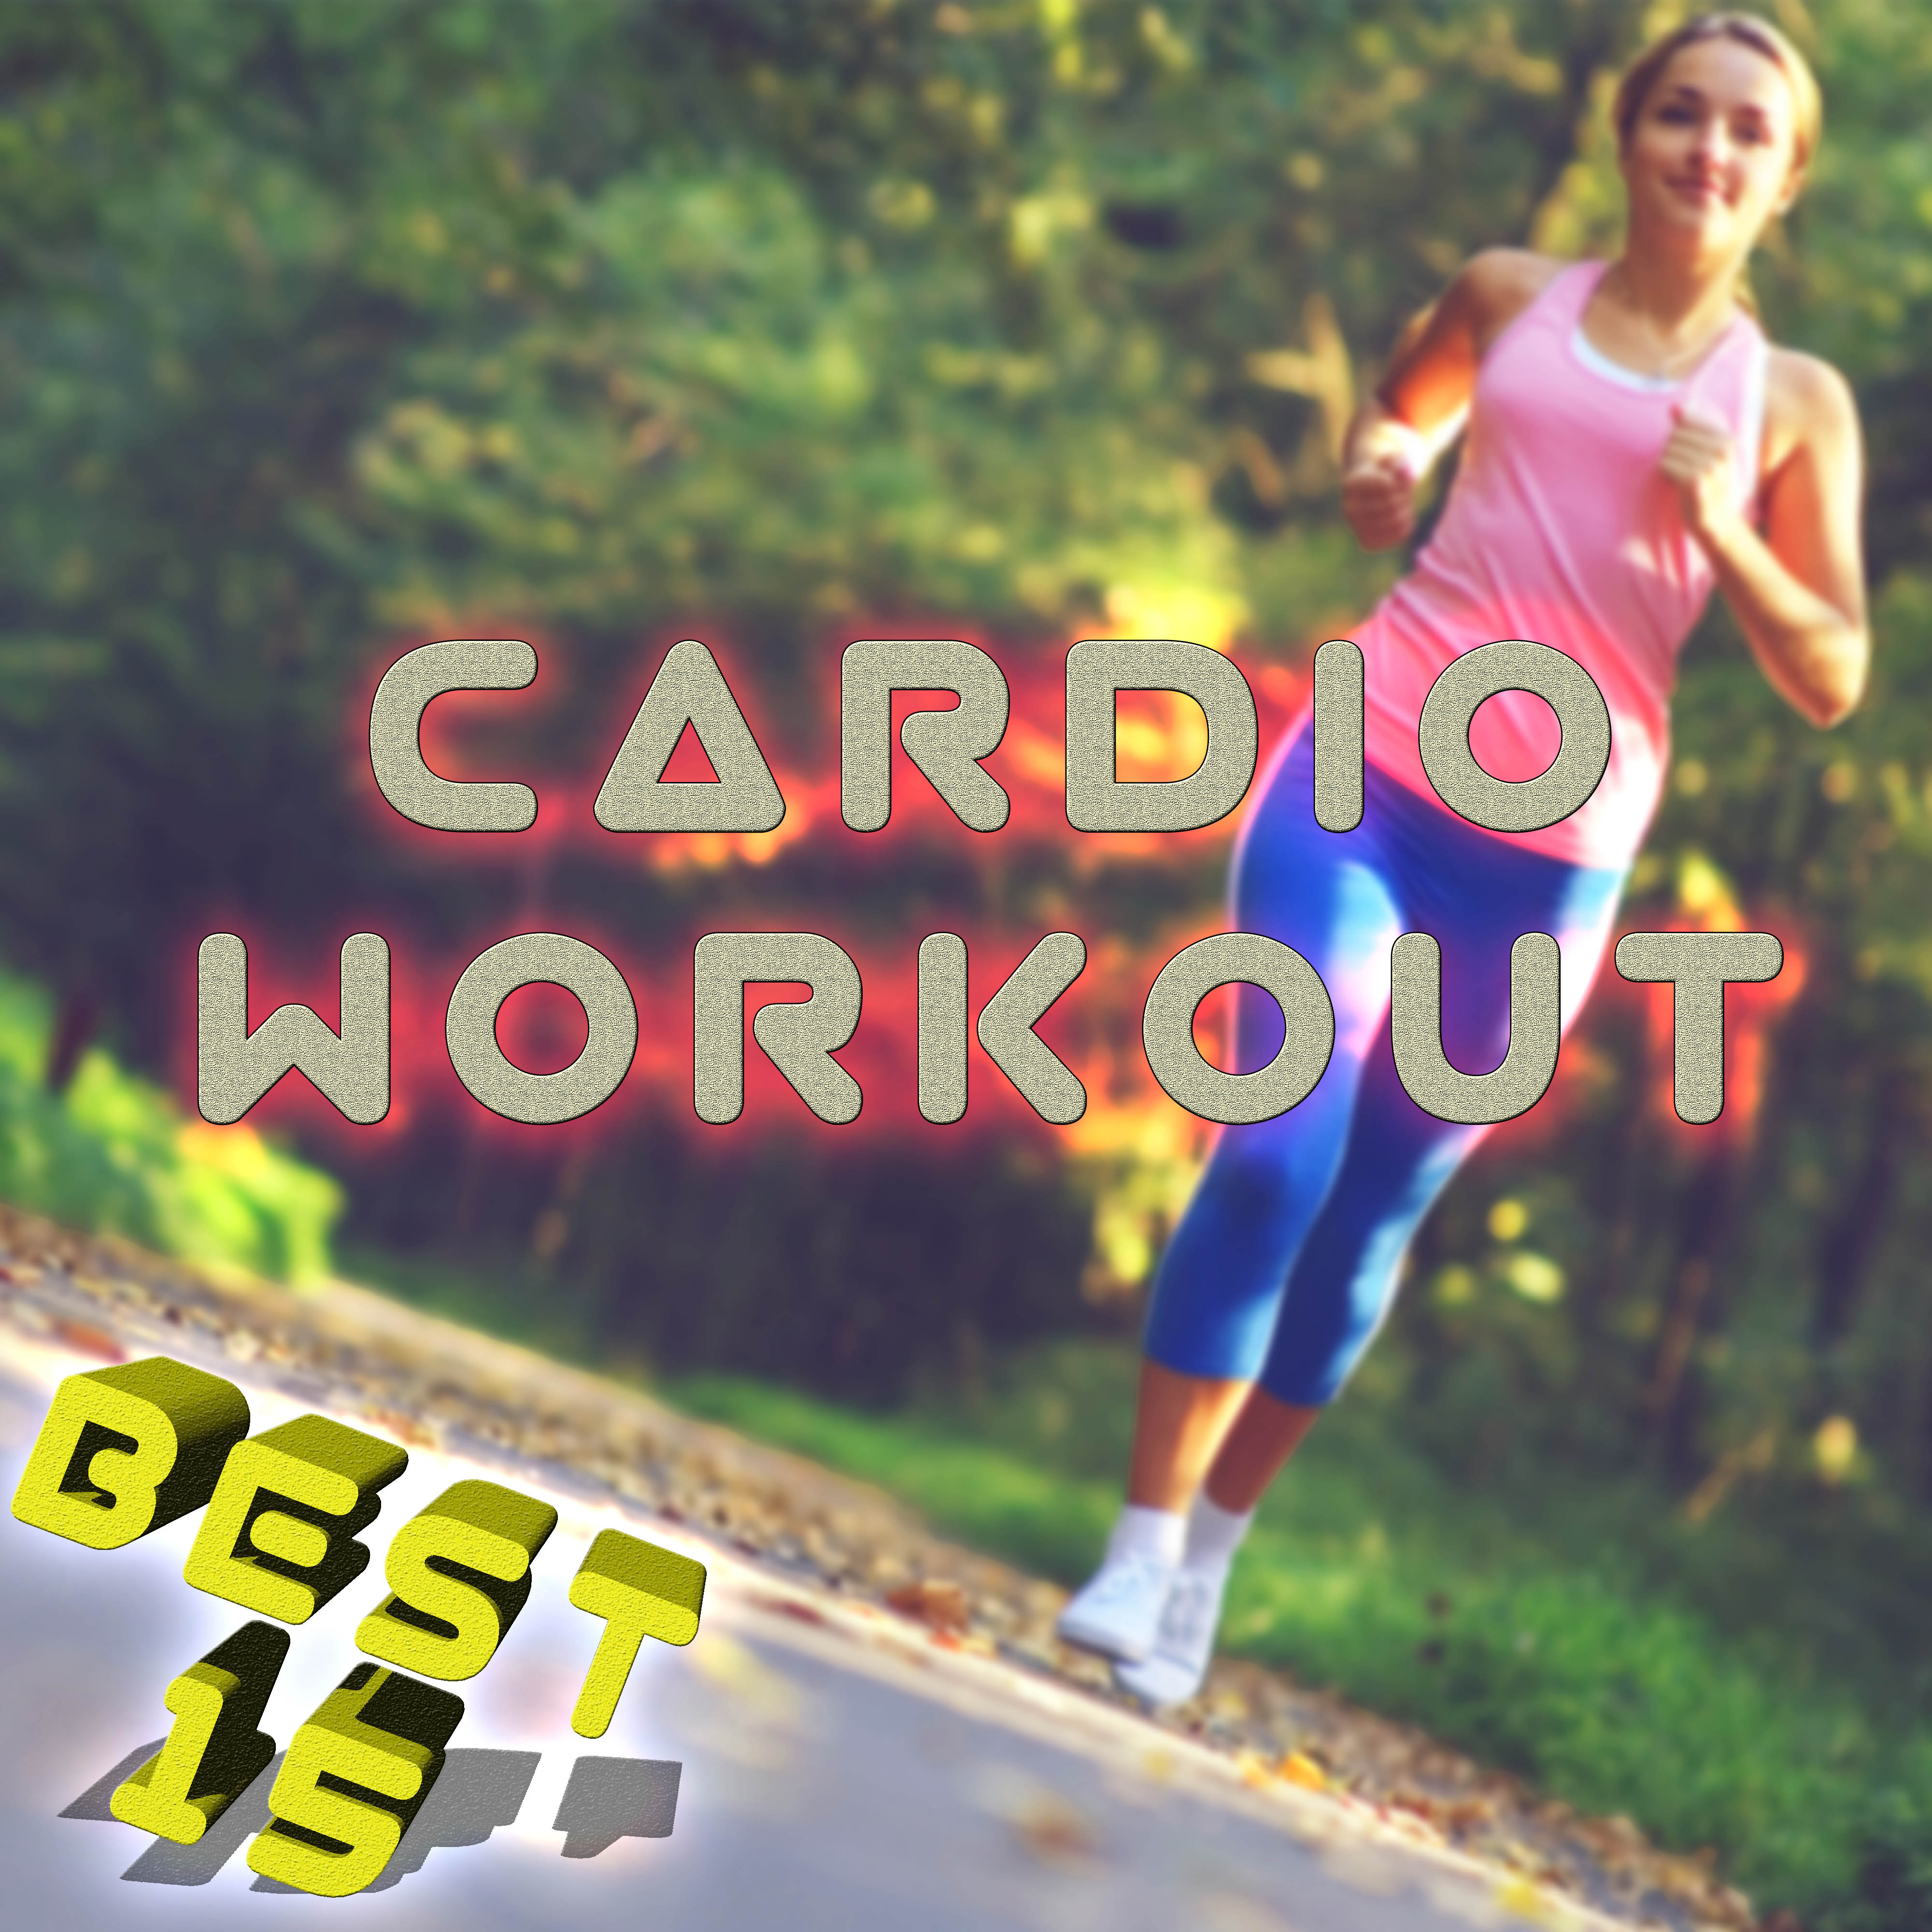 Best 15 Cardio Workout Tracks: Boost Your Performance